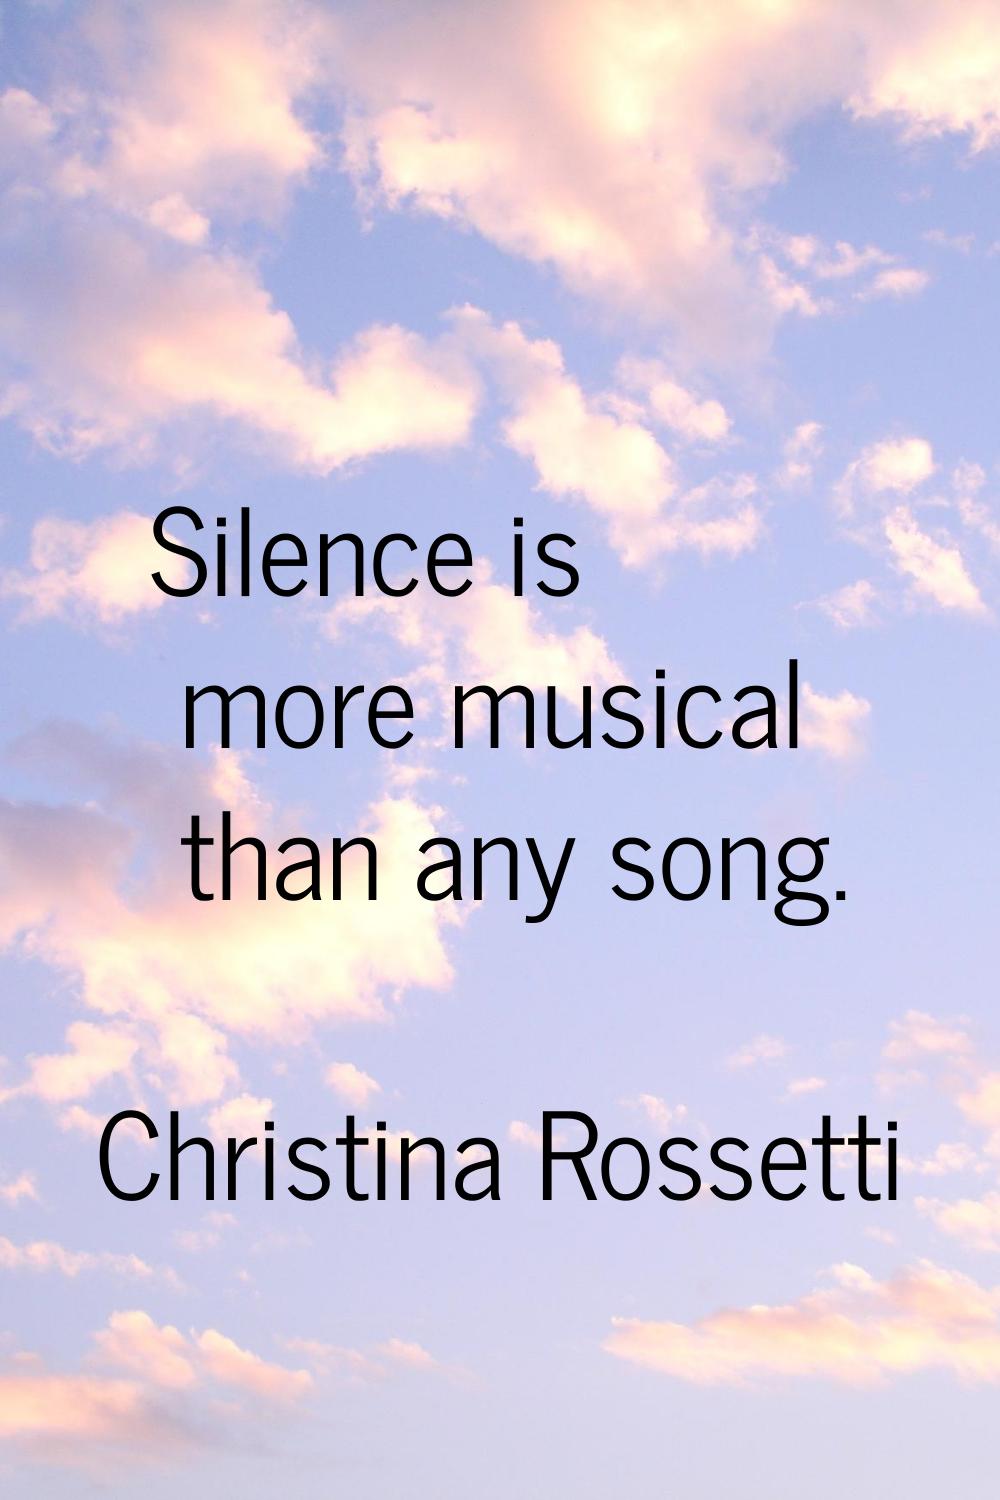 Silence is more musical than any song.